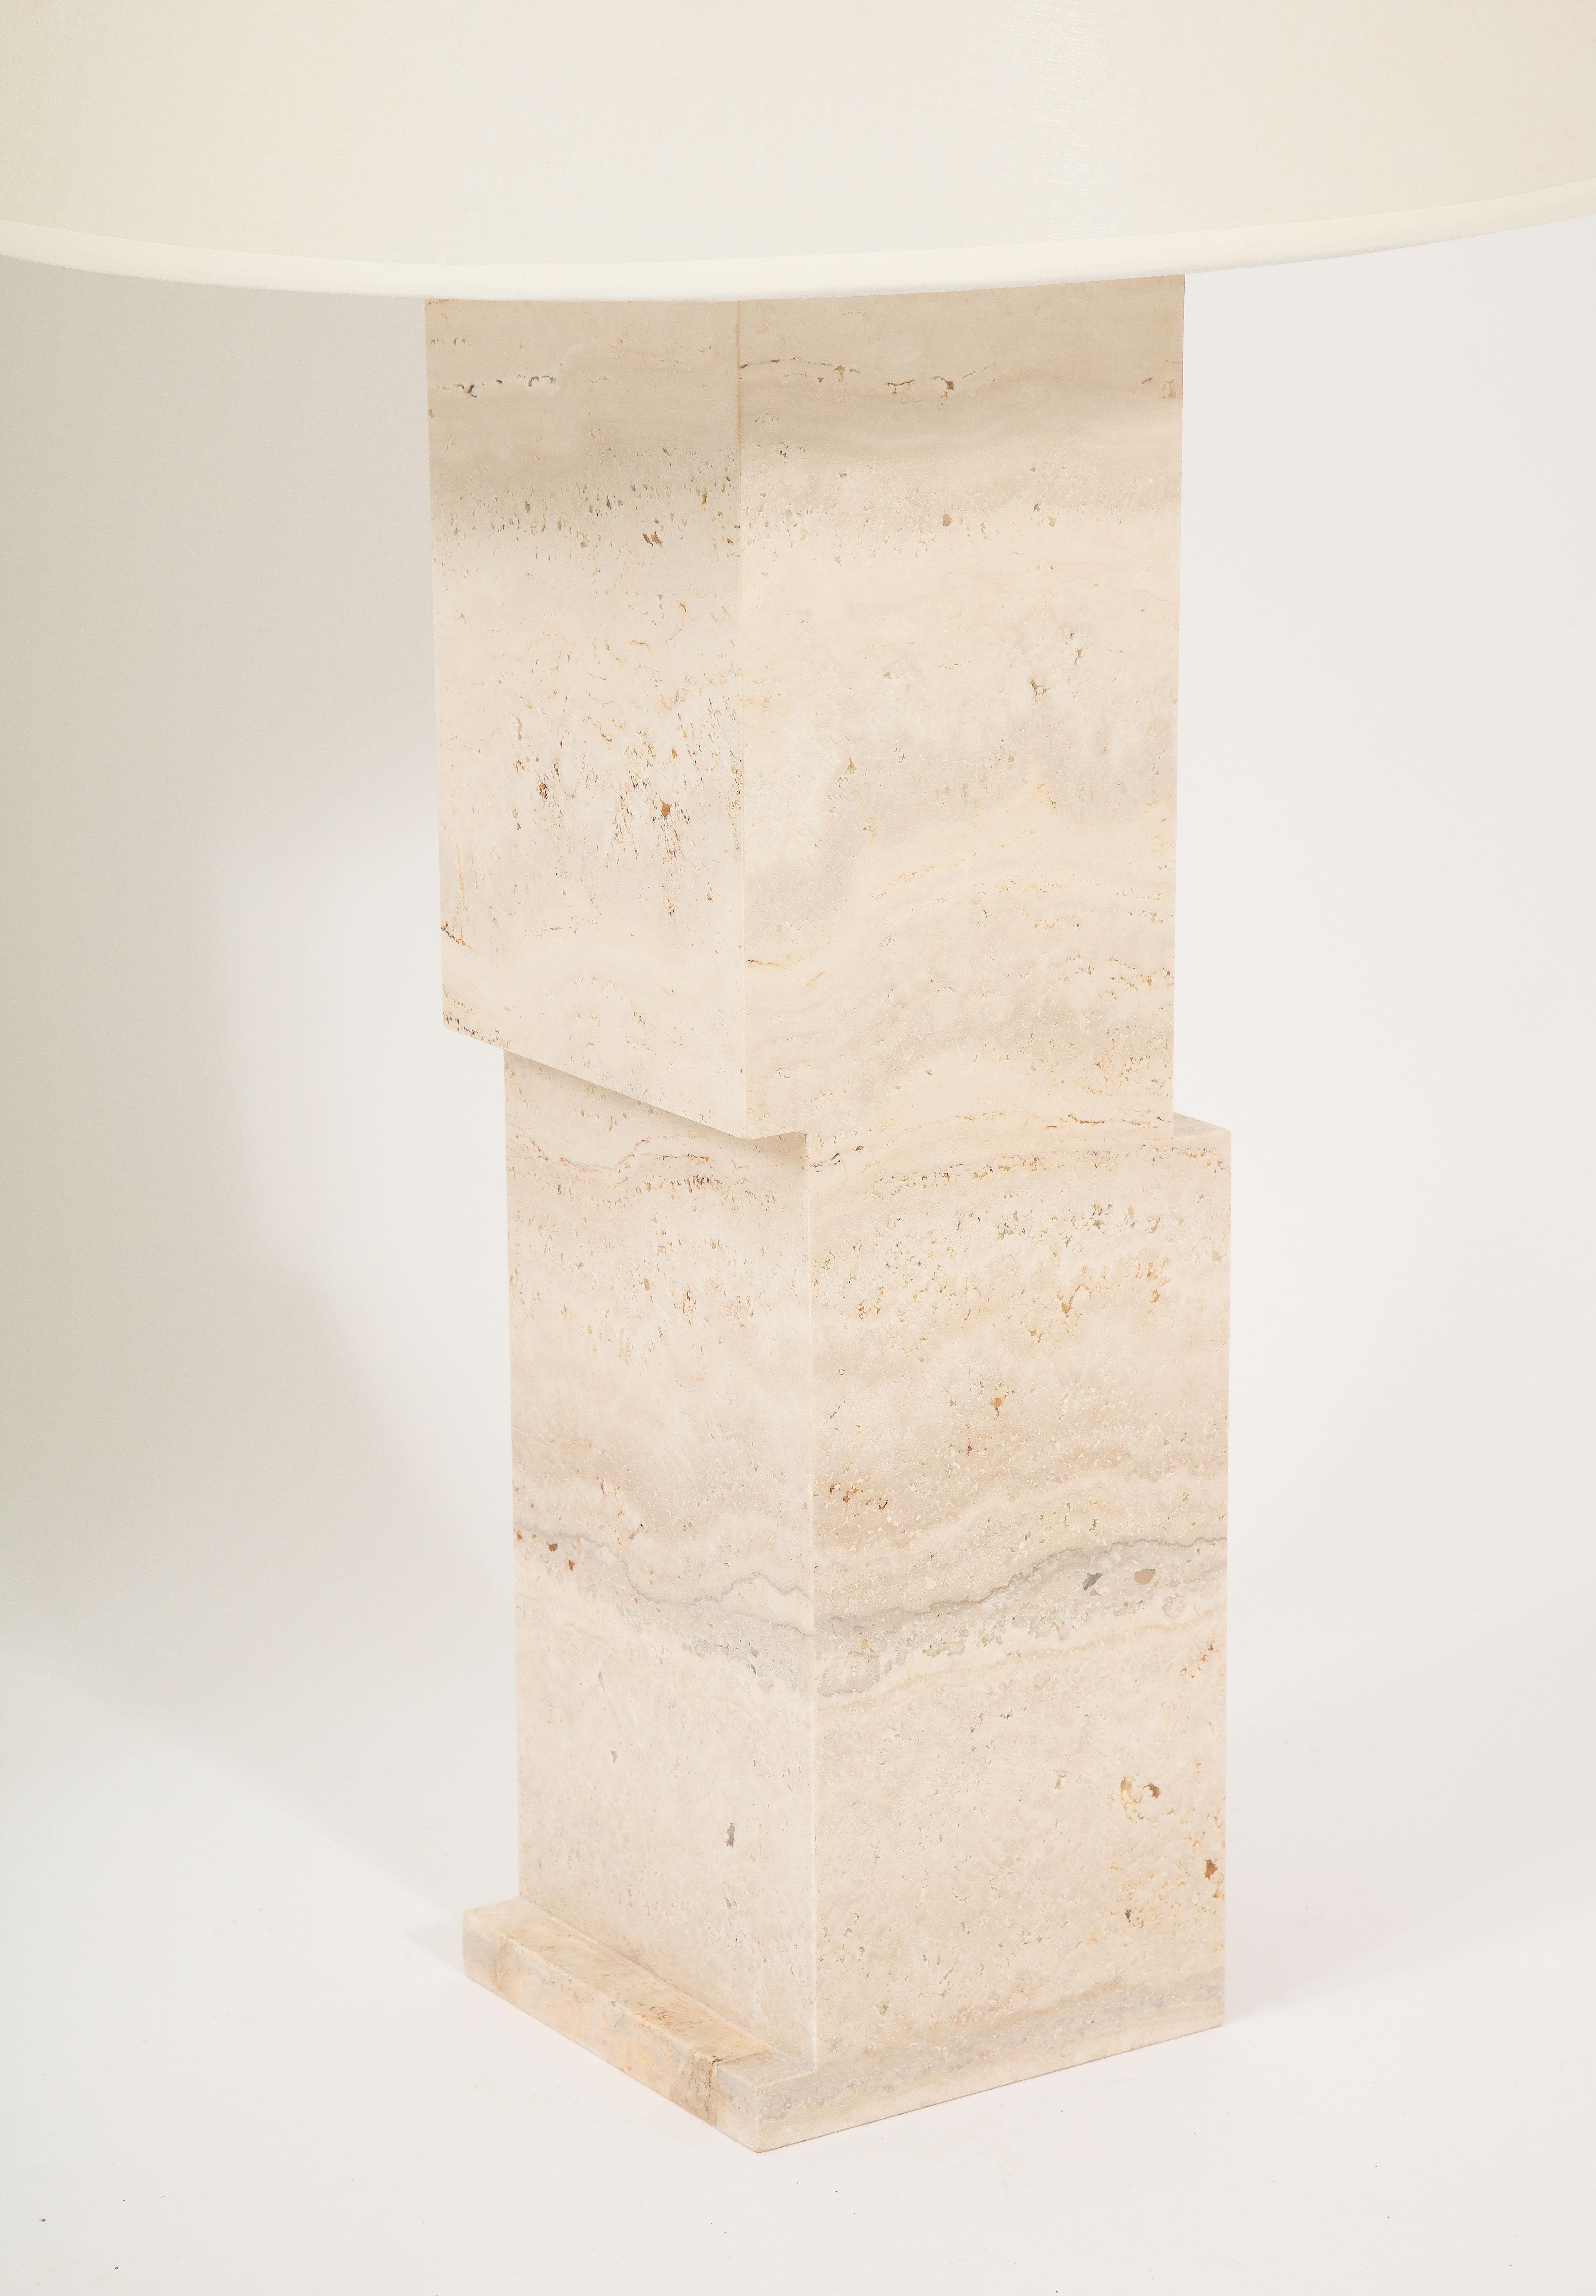 Stunning custom travertine lamps, made to order these lamps can be produced in a choice of size and colors. enquire for custom specifications. Price is for one, wiring and shade included.